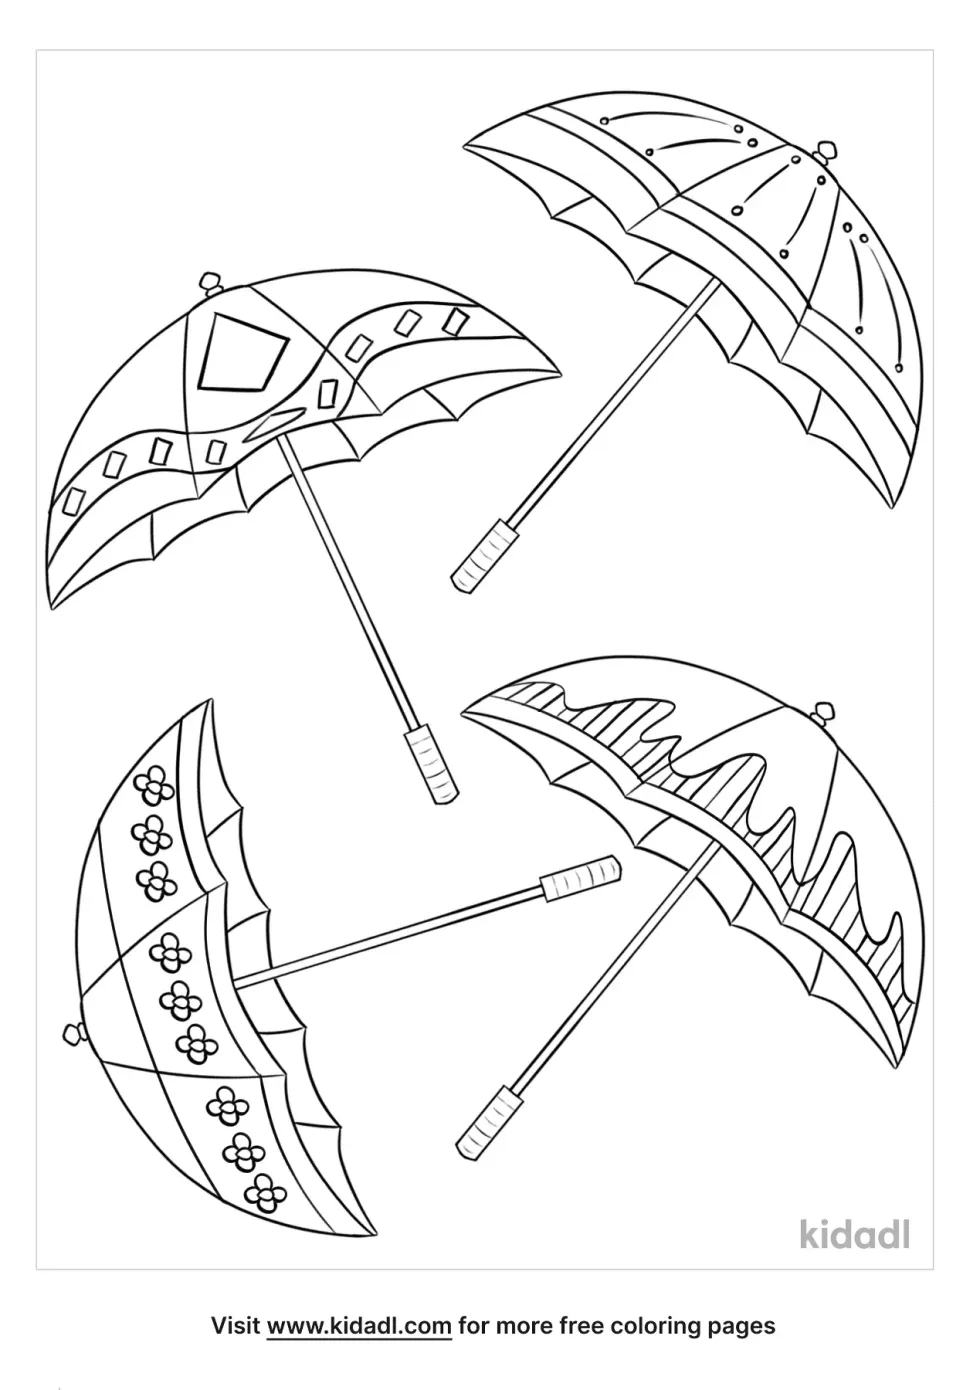 A coloring picture showing 4 umbrella images